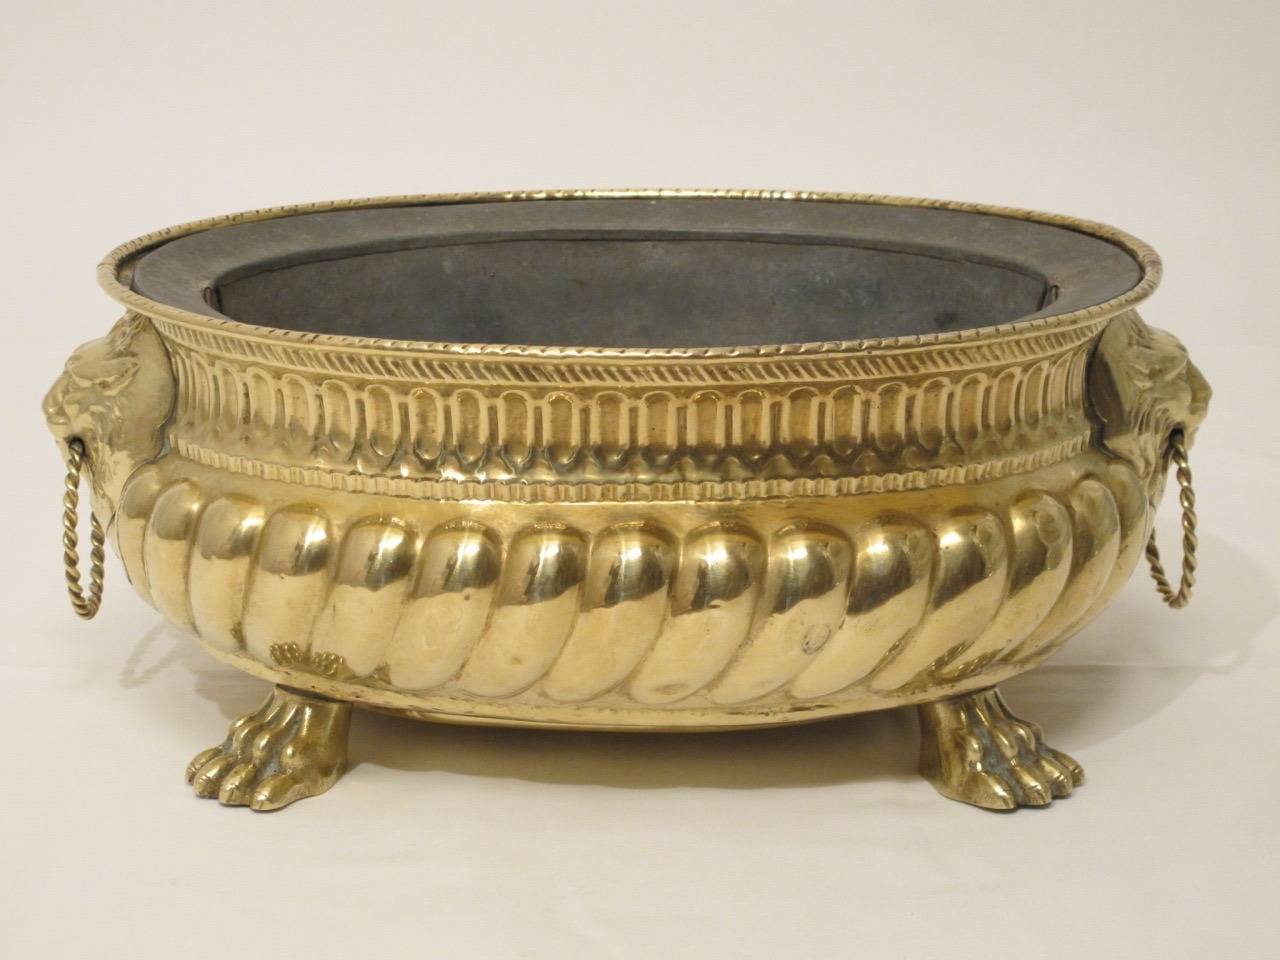 Antique oval brass cache pot with fitted tole liner. Wonderful lion masks holding twisted rope in open mouths. Concave egg and dart design below the broad rim with prominent convex gadrooning supported on lion paw feet.